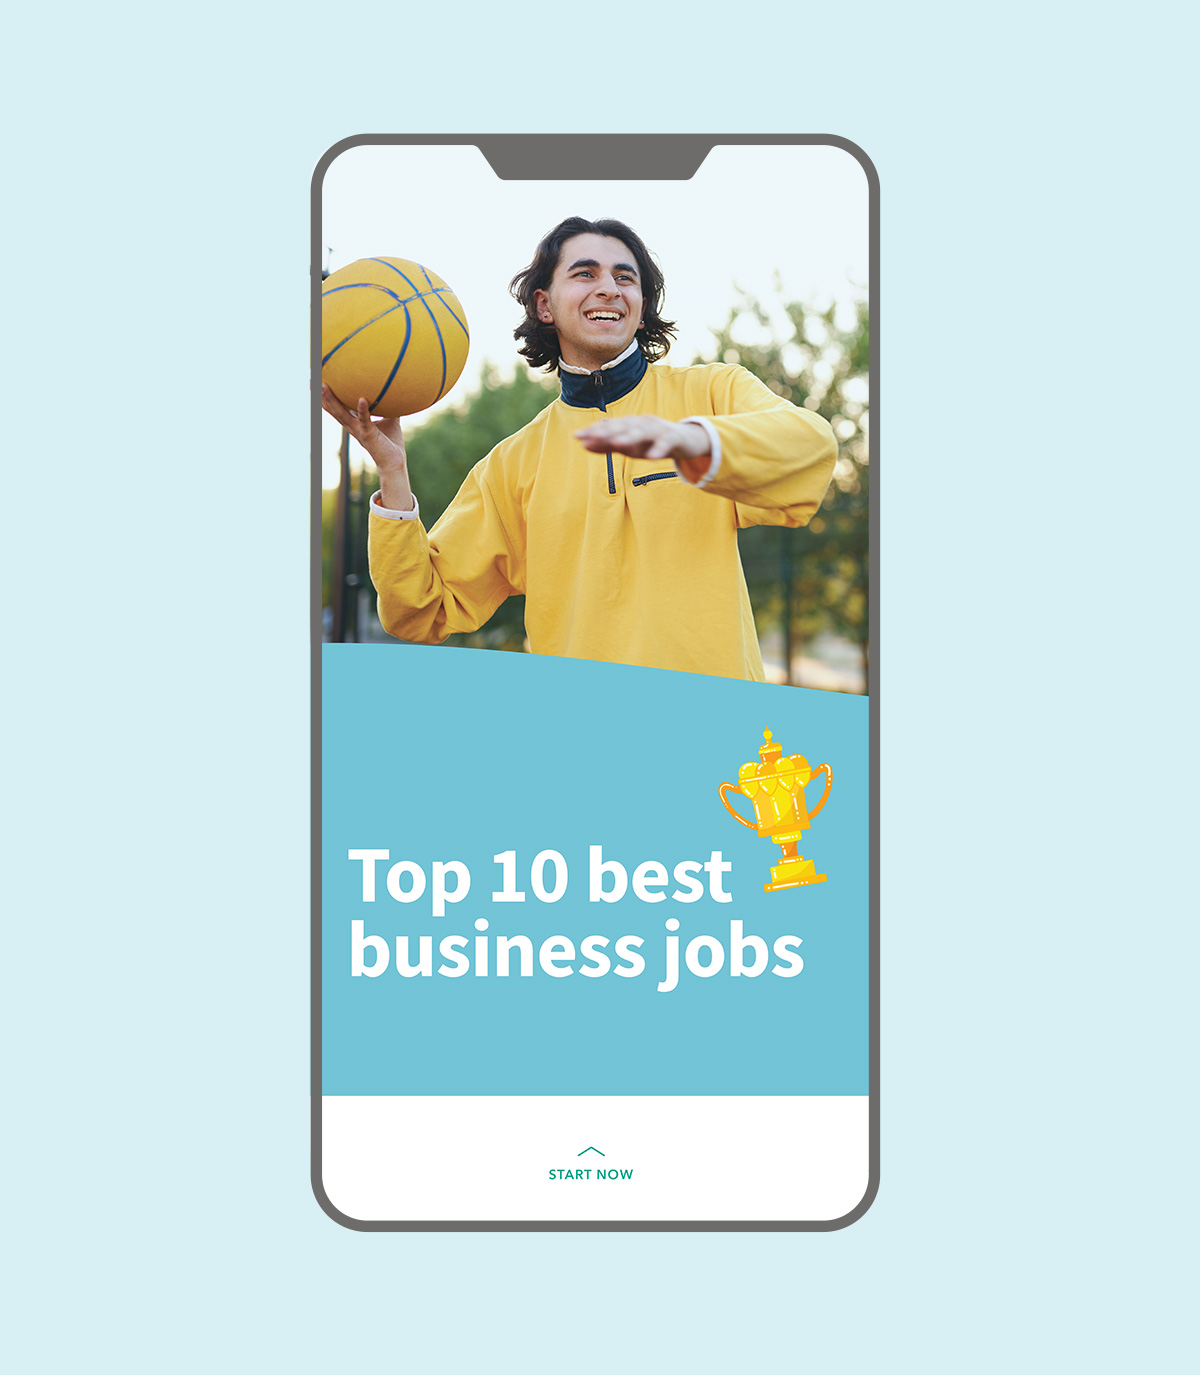 Phone: Young basketball player. Top 10 business jobs